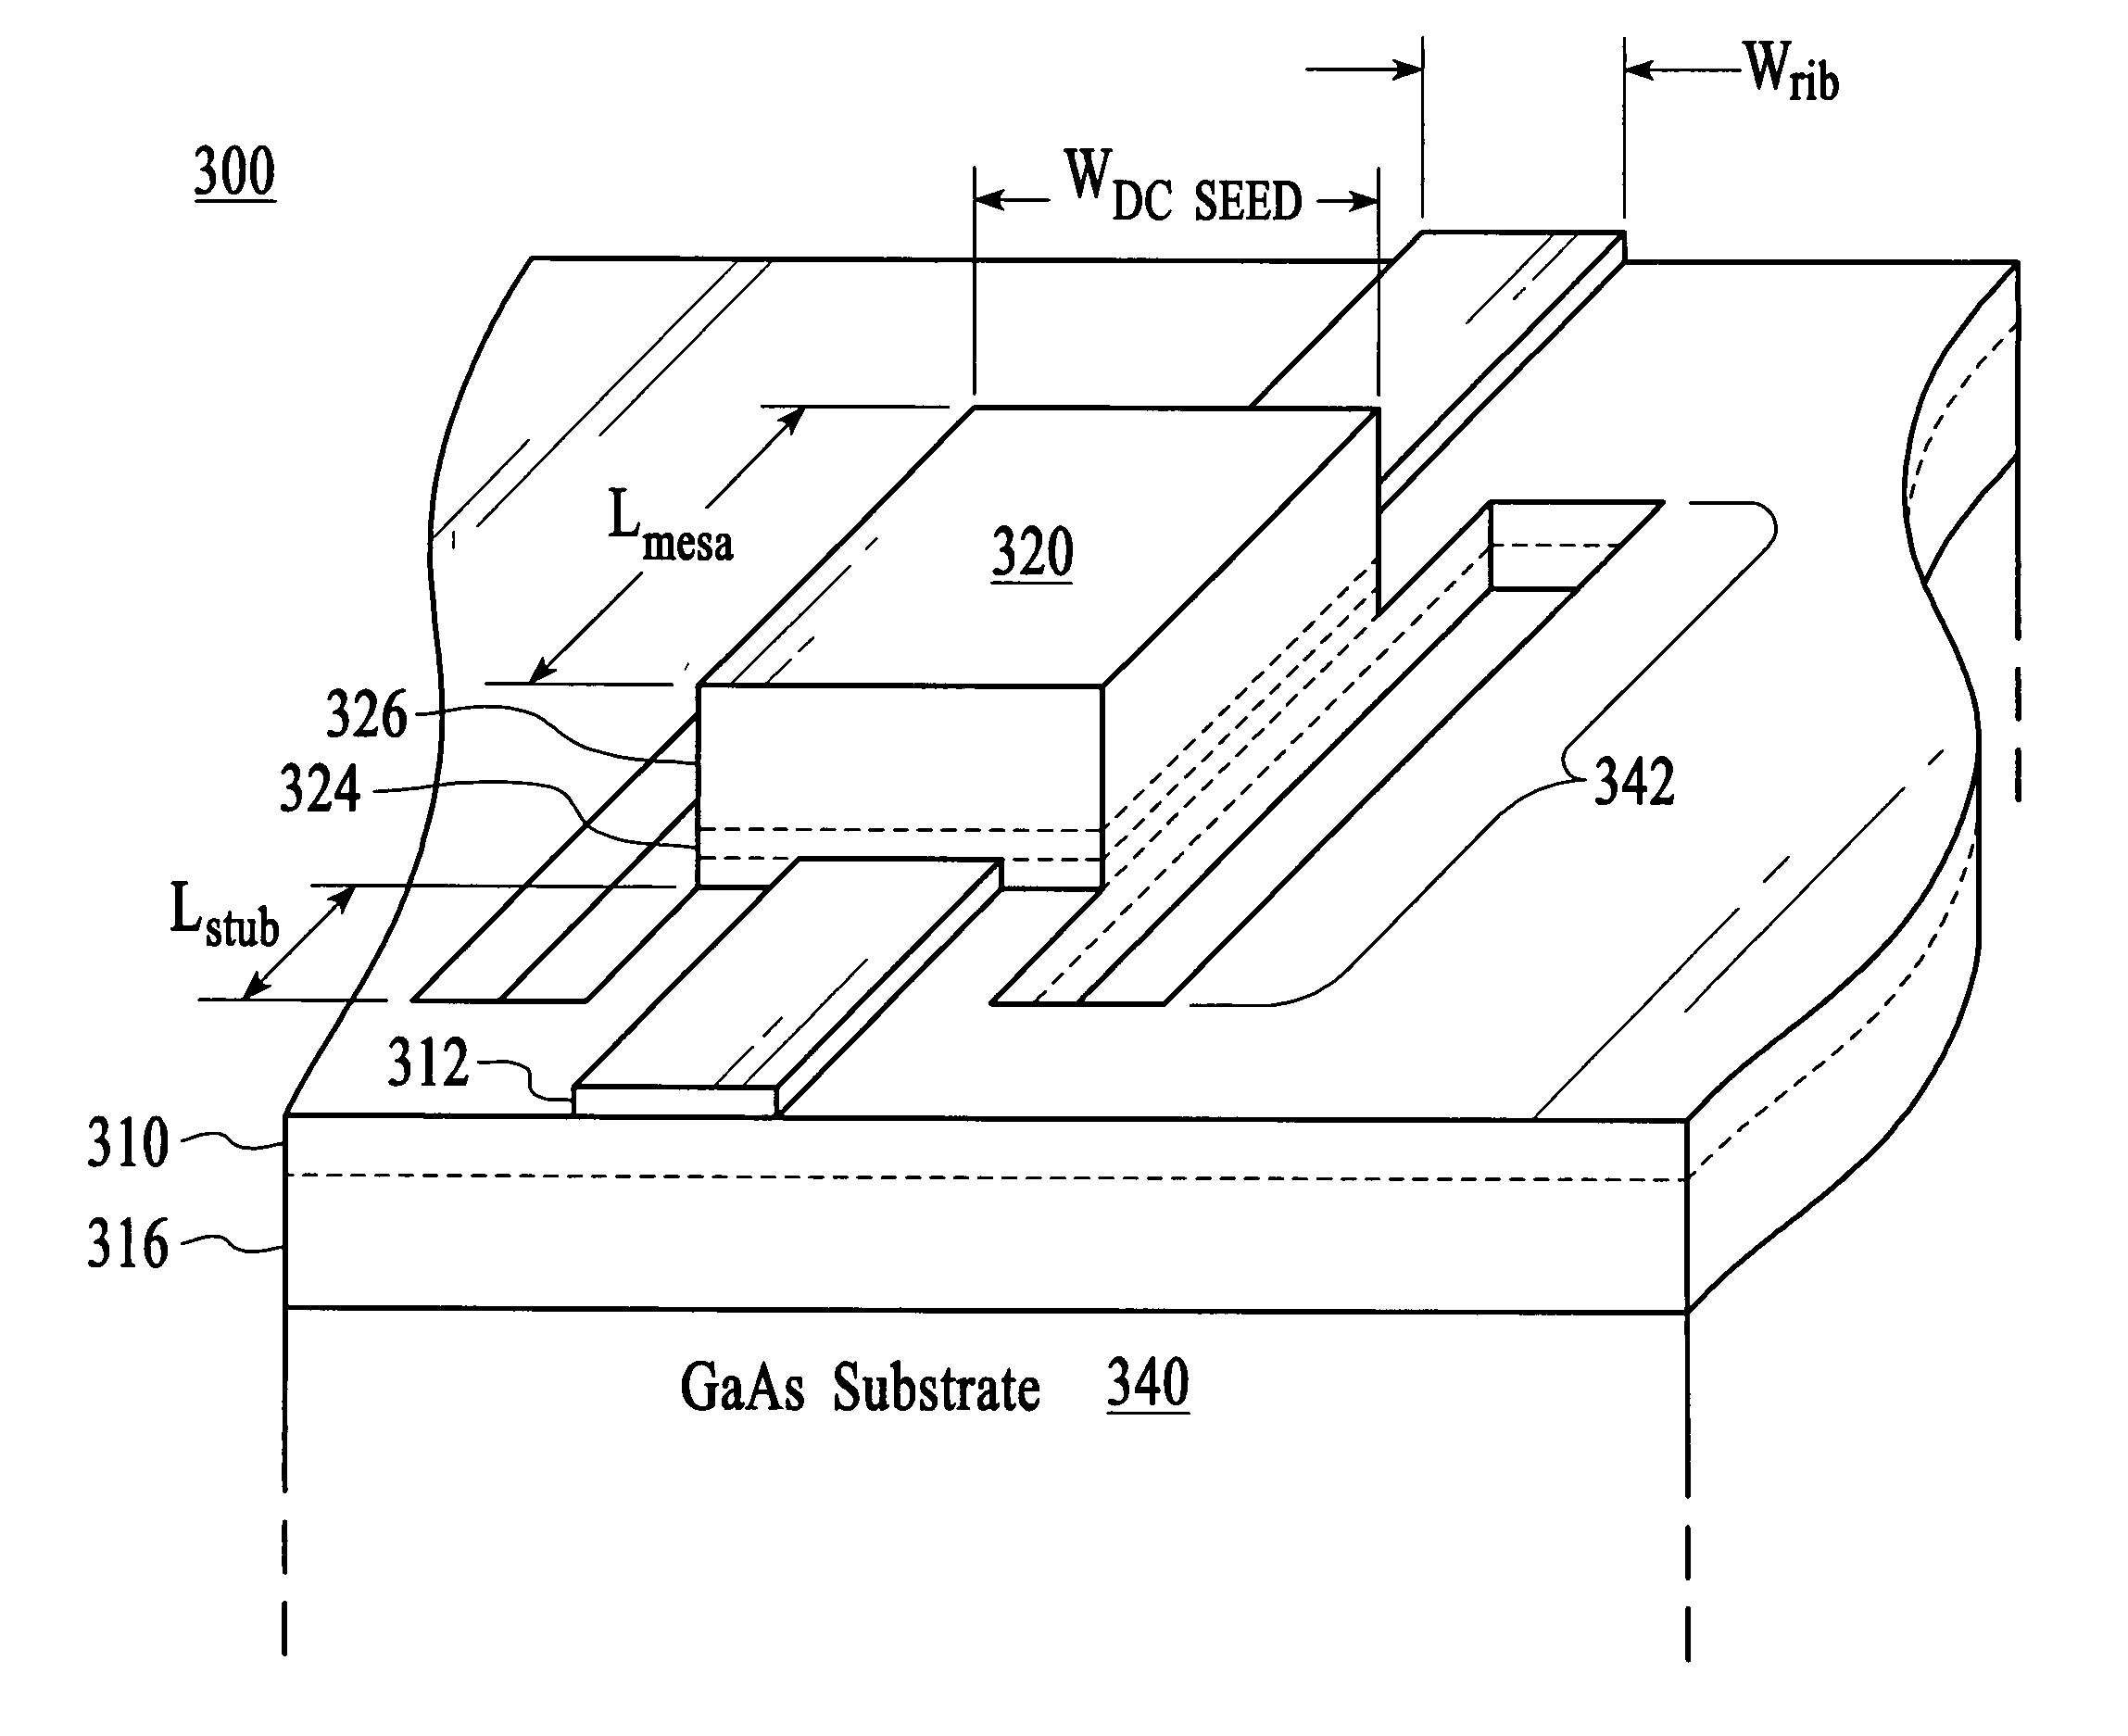 Integration of a waveguide self-electrooptic effect device and a vertically coupled interconnect waveguide